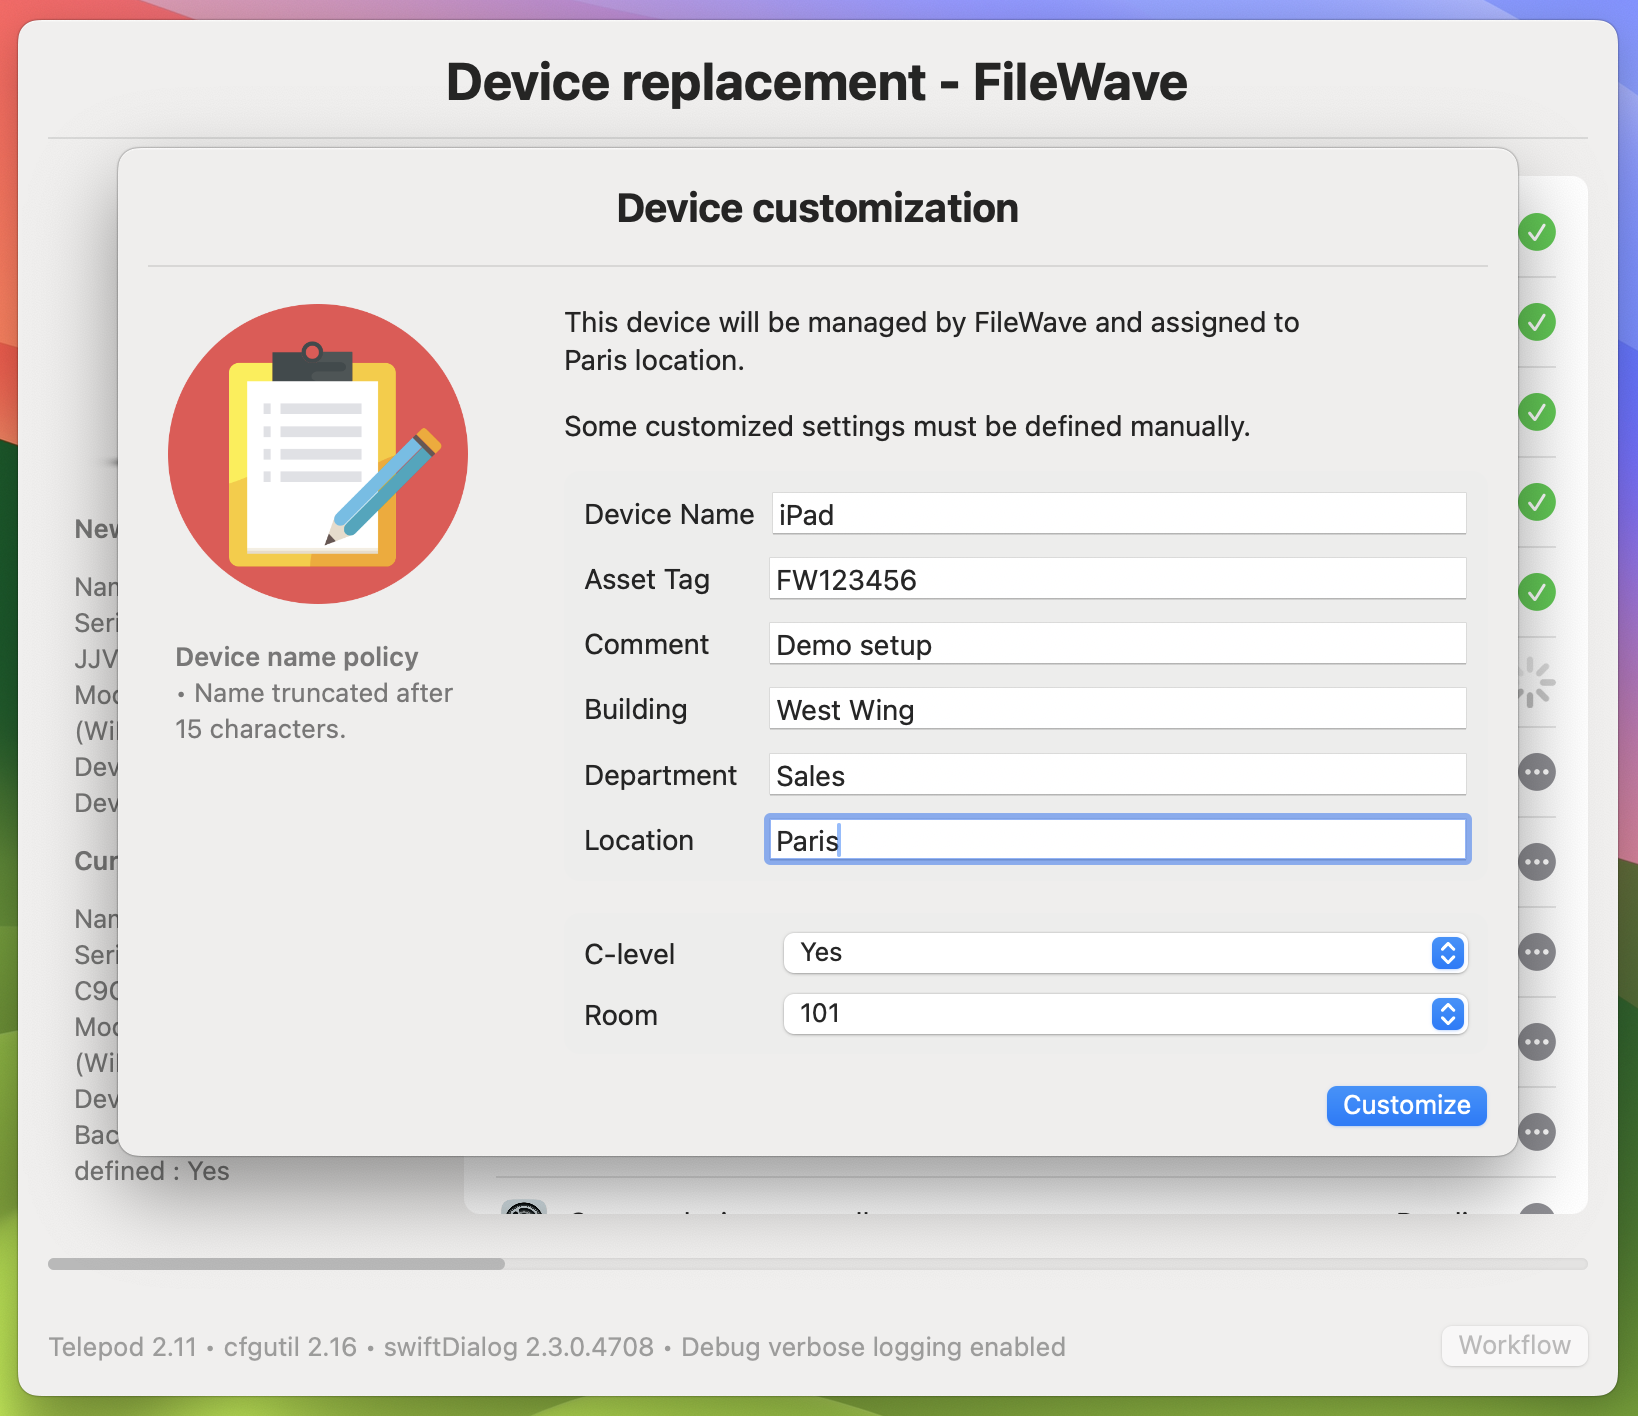 telepod_2_replacement_filewave_008_New device customization.png